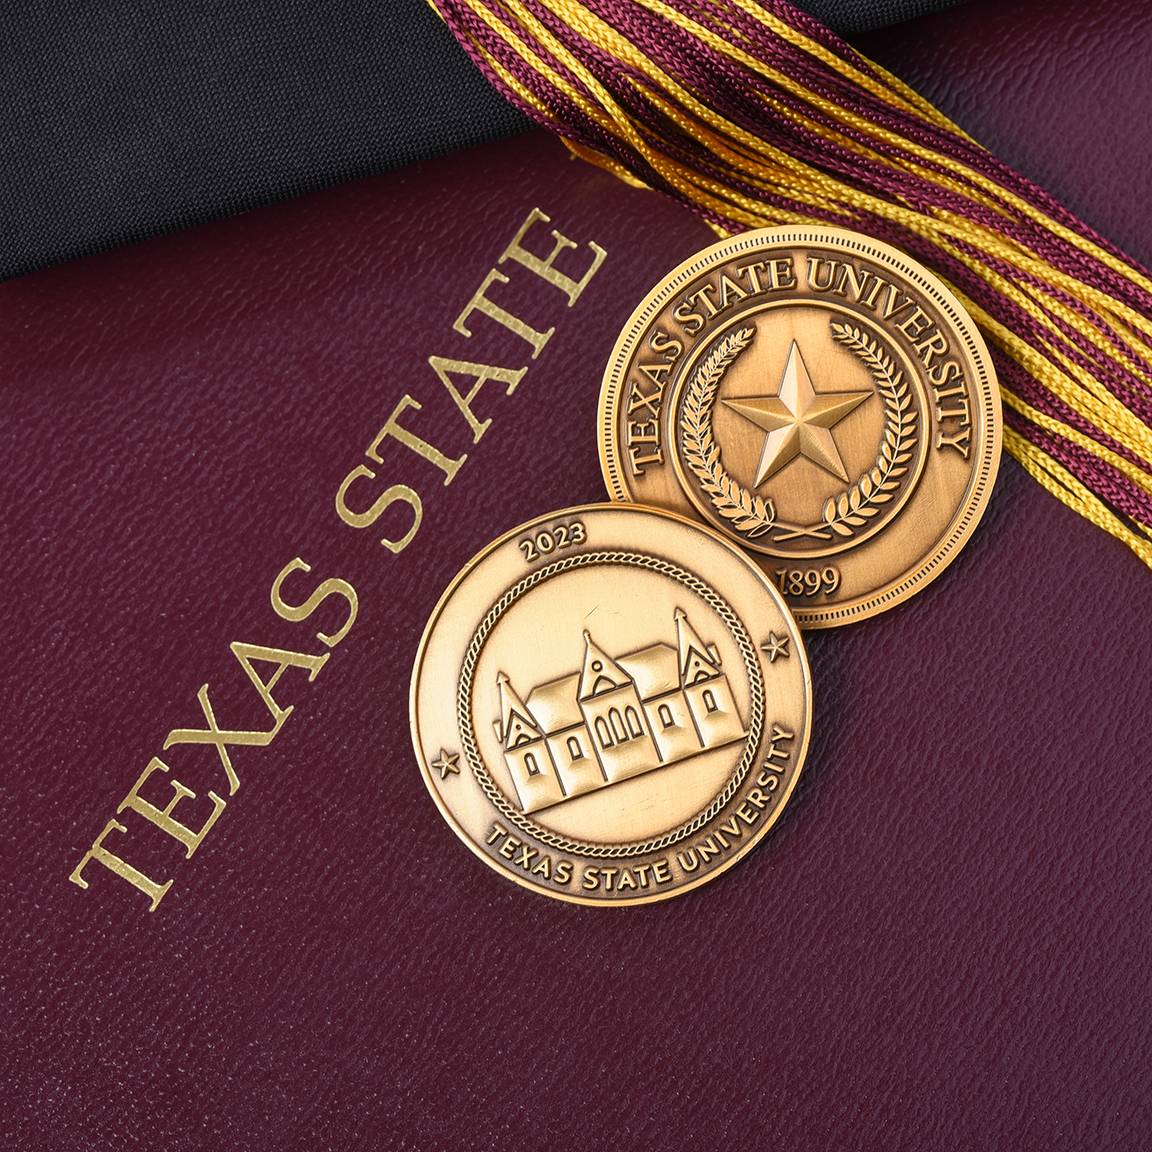 two challenge coins on maroon background reading 'texas state' in gold